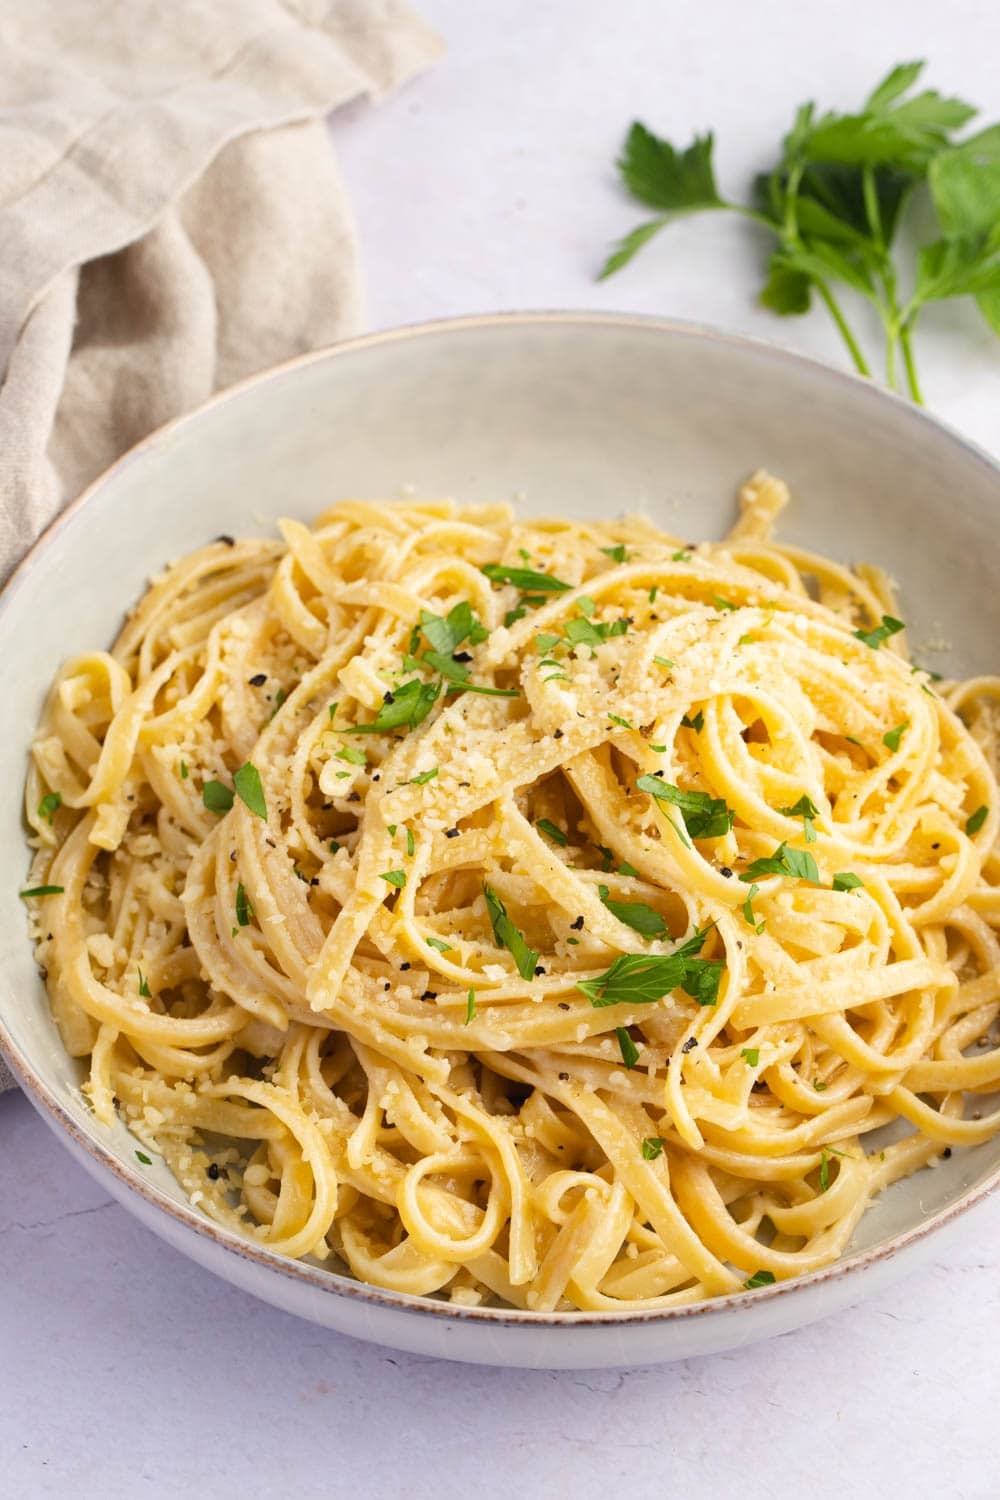 Buttered noodles on plate served with parmesan cheese.